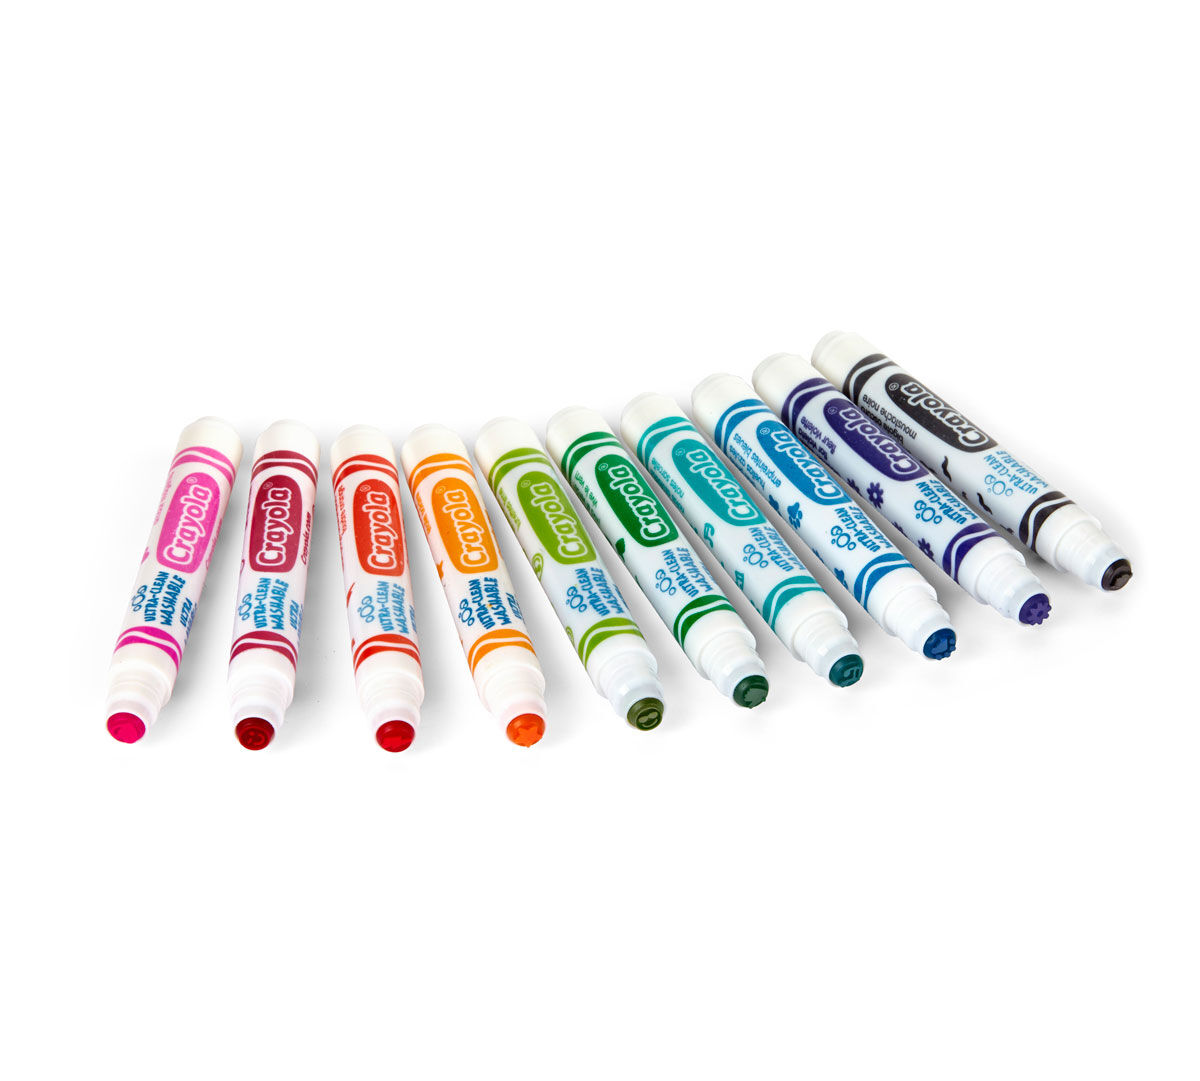 Crayola Ultra Clean Washable Markers, Stampers, Crayola.com